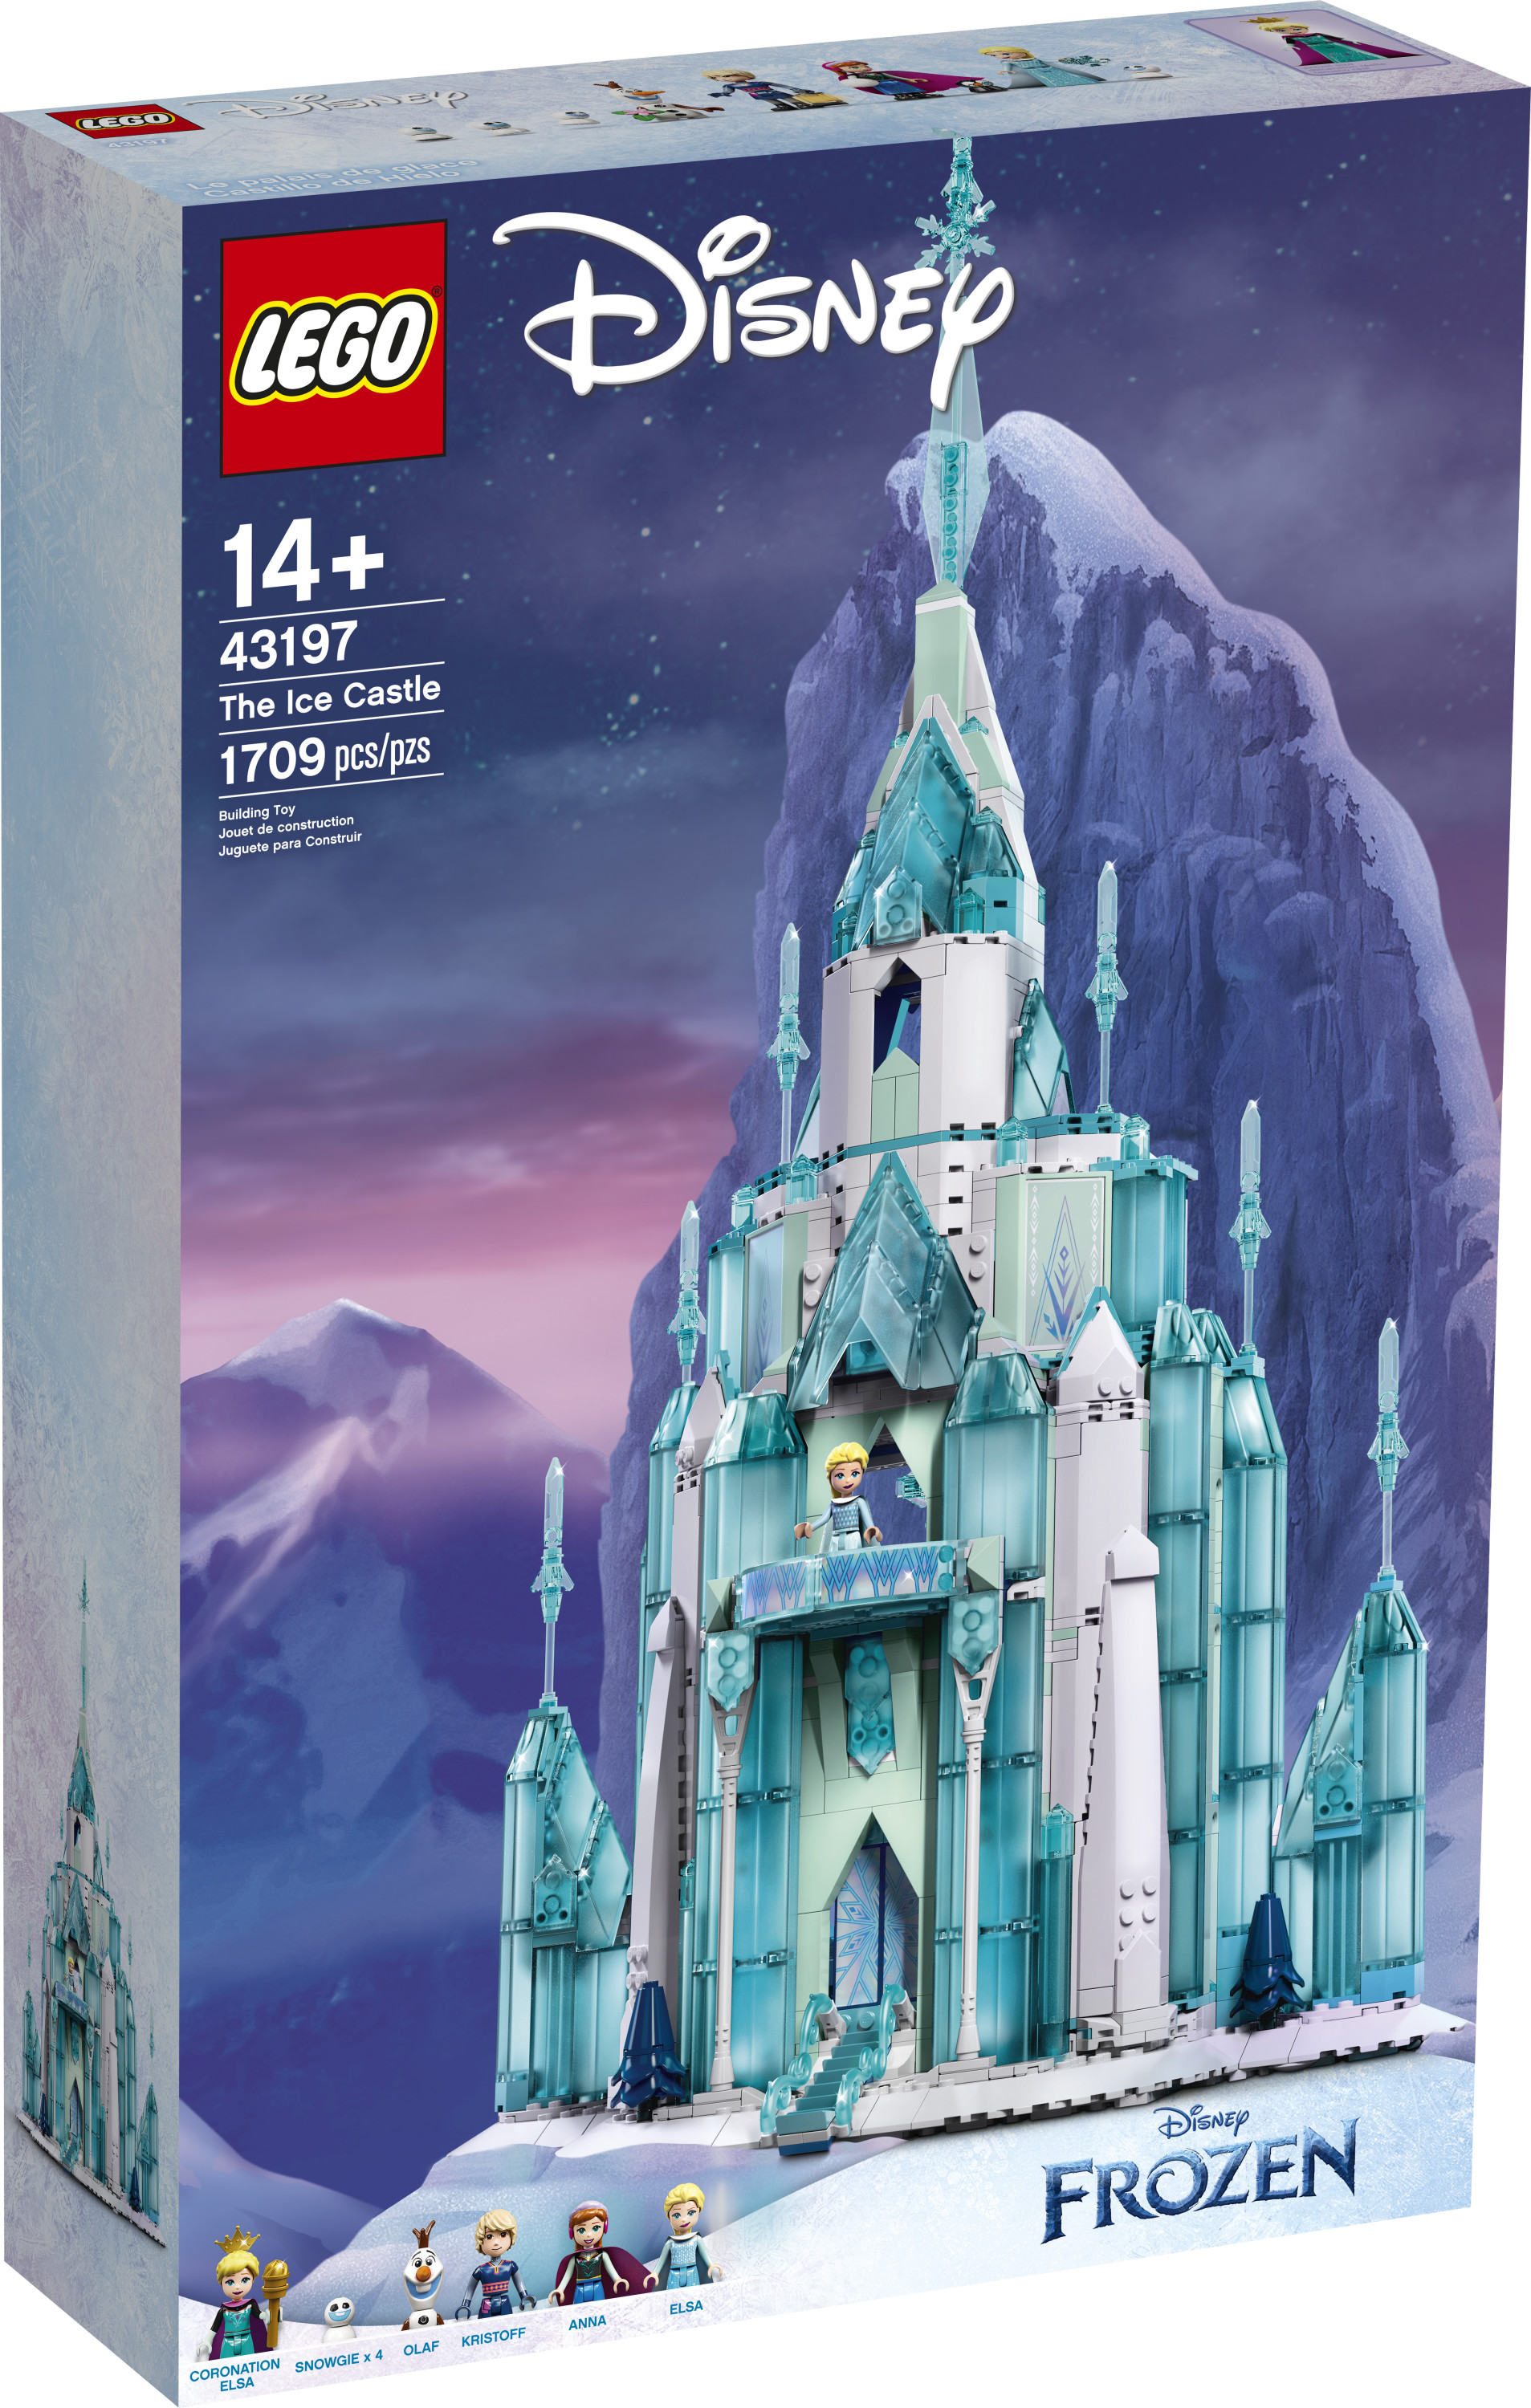 LEGO Disney Princess The Ice Castle Building Toy 43197, with Frozen Anna and Elsa Mini Doll Figures and Olaf Figure, Disney Castle Kit to Build, Disney Gift Idea, Castle Toy for Kids Age 6+ Years Old - image 3 of 8